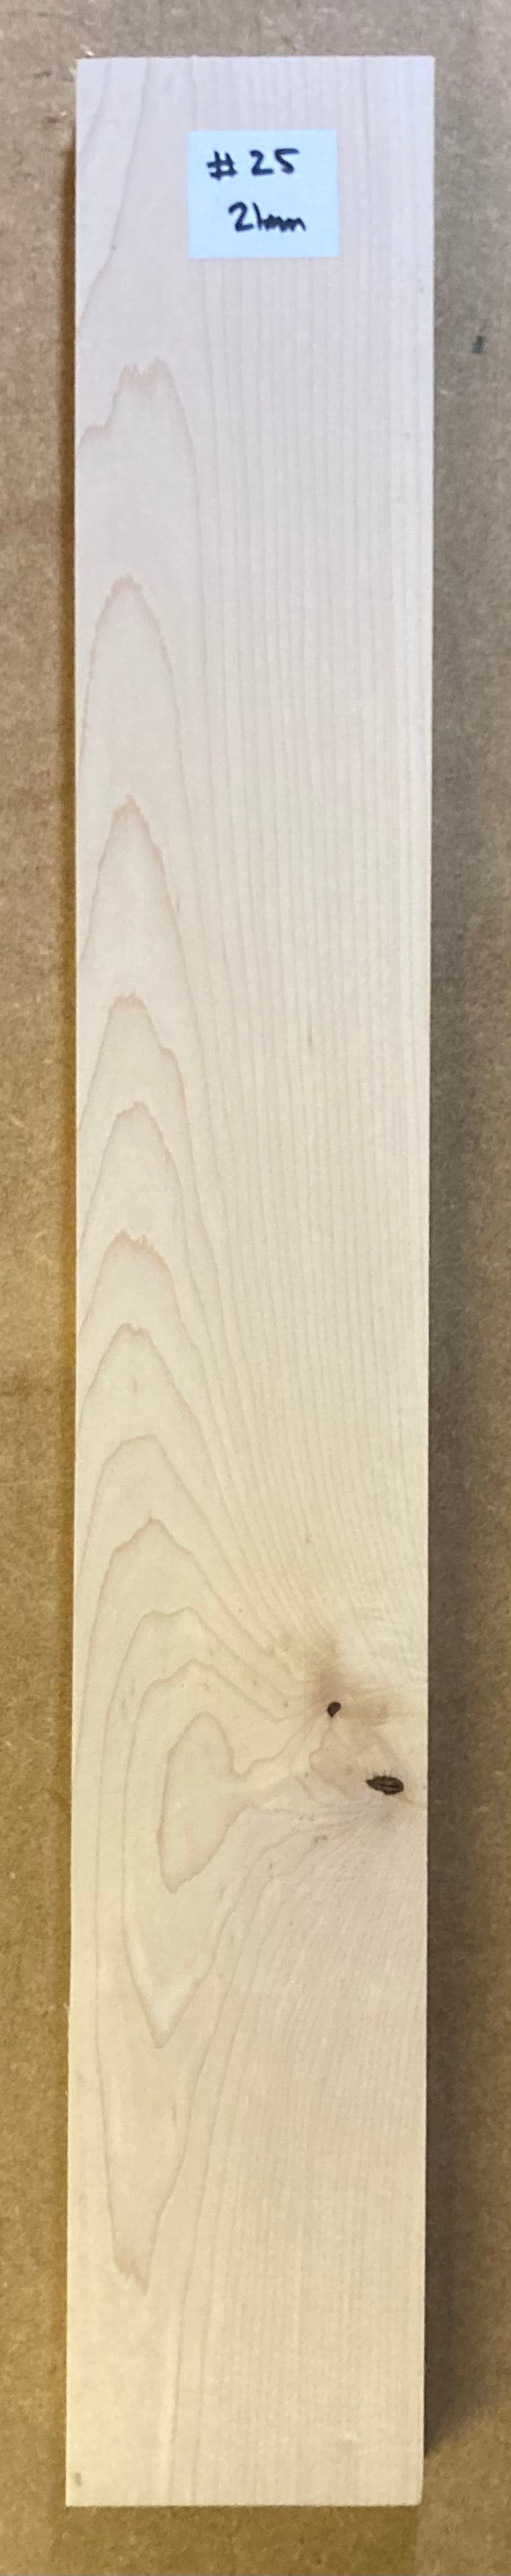 Electric Neck Blank - Maple #25